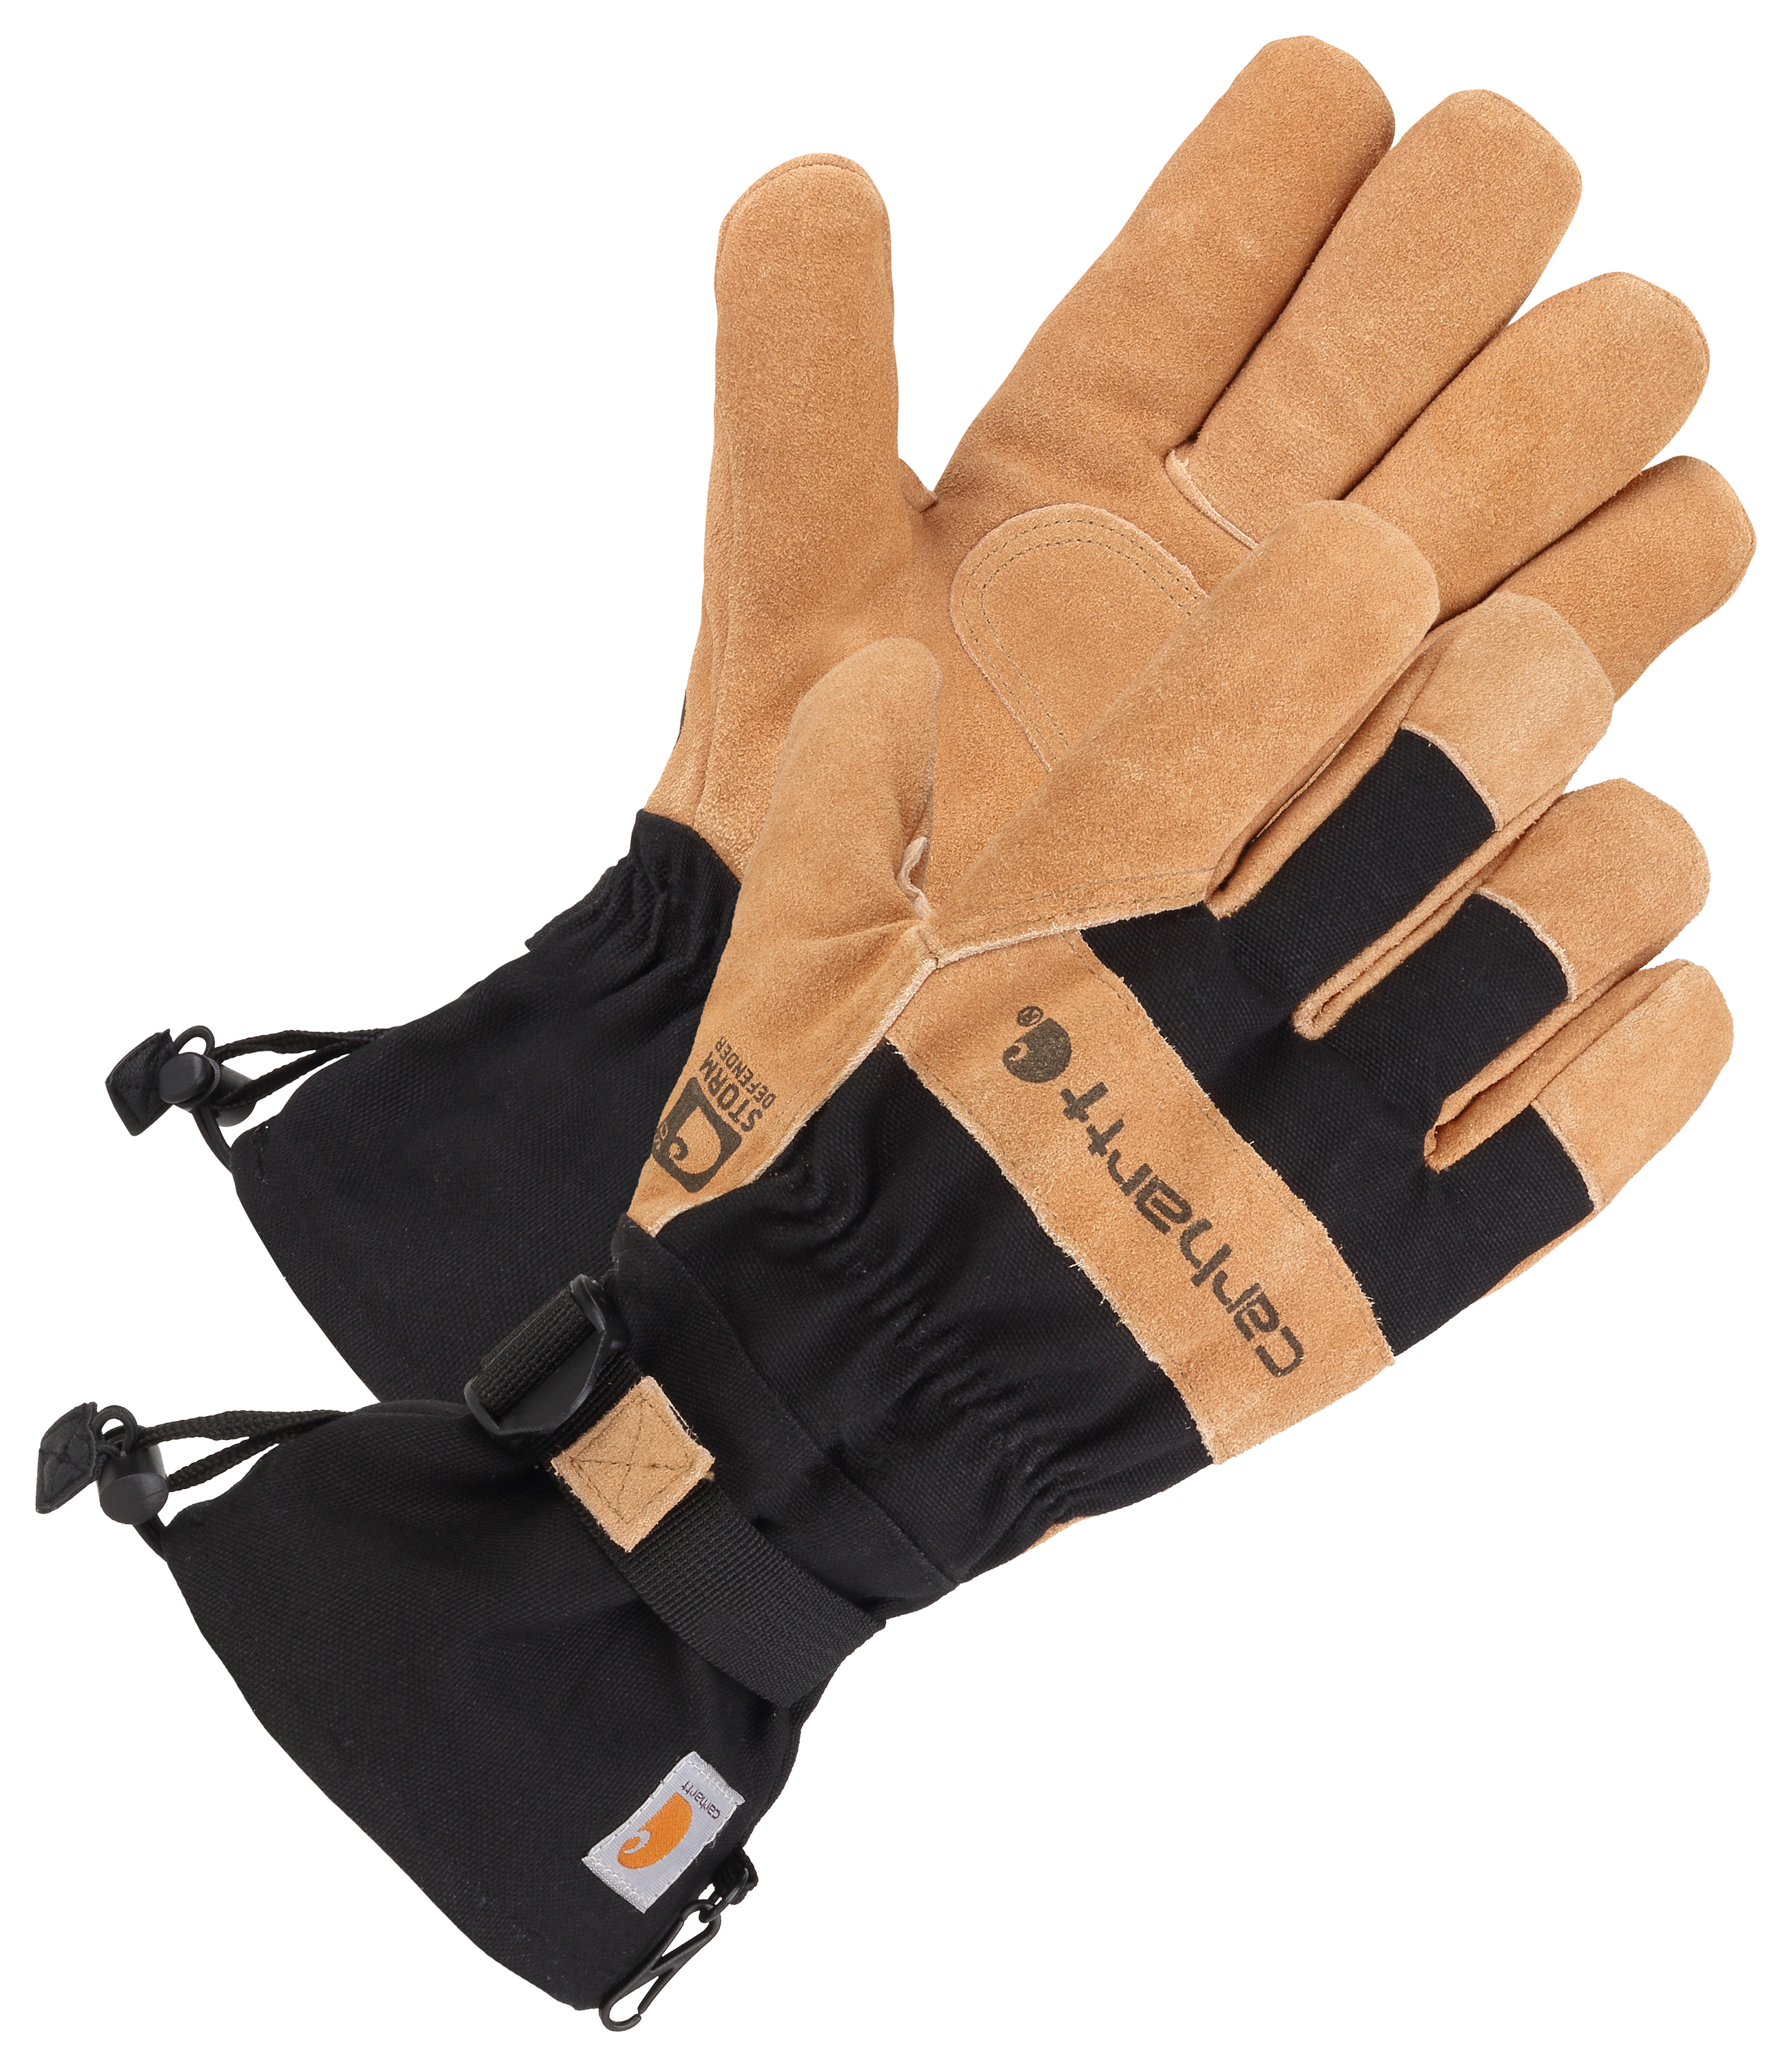 Carhartt Thermal Full-Coverage Nitrile Grip Gloves, 1 Pair, Rib-Knit Cuffs  at Tractor Supply Co.